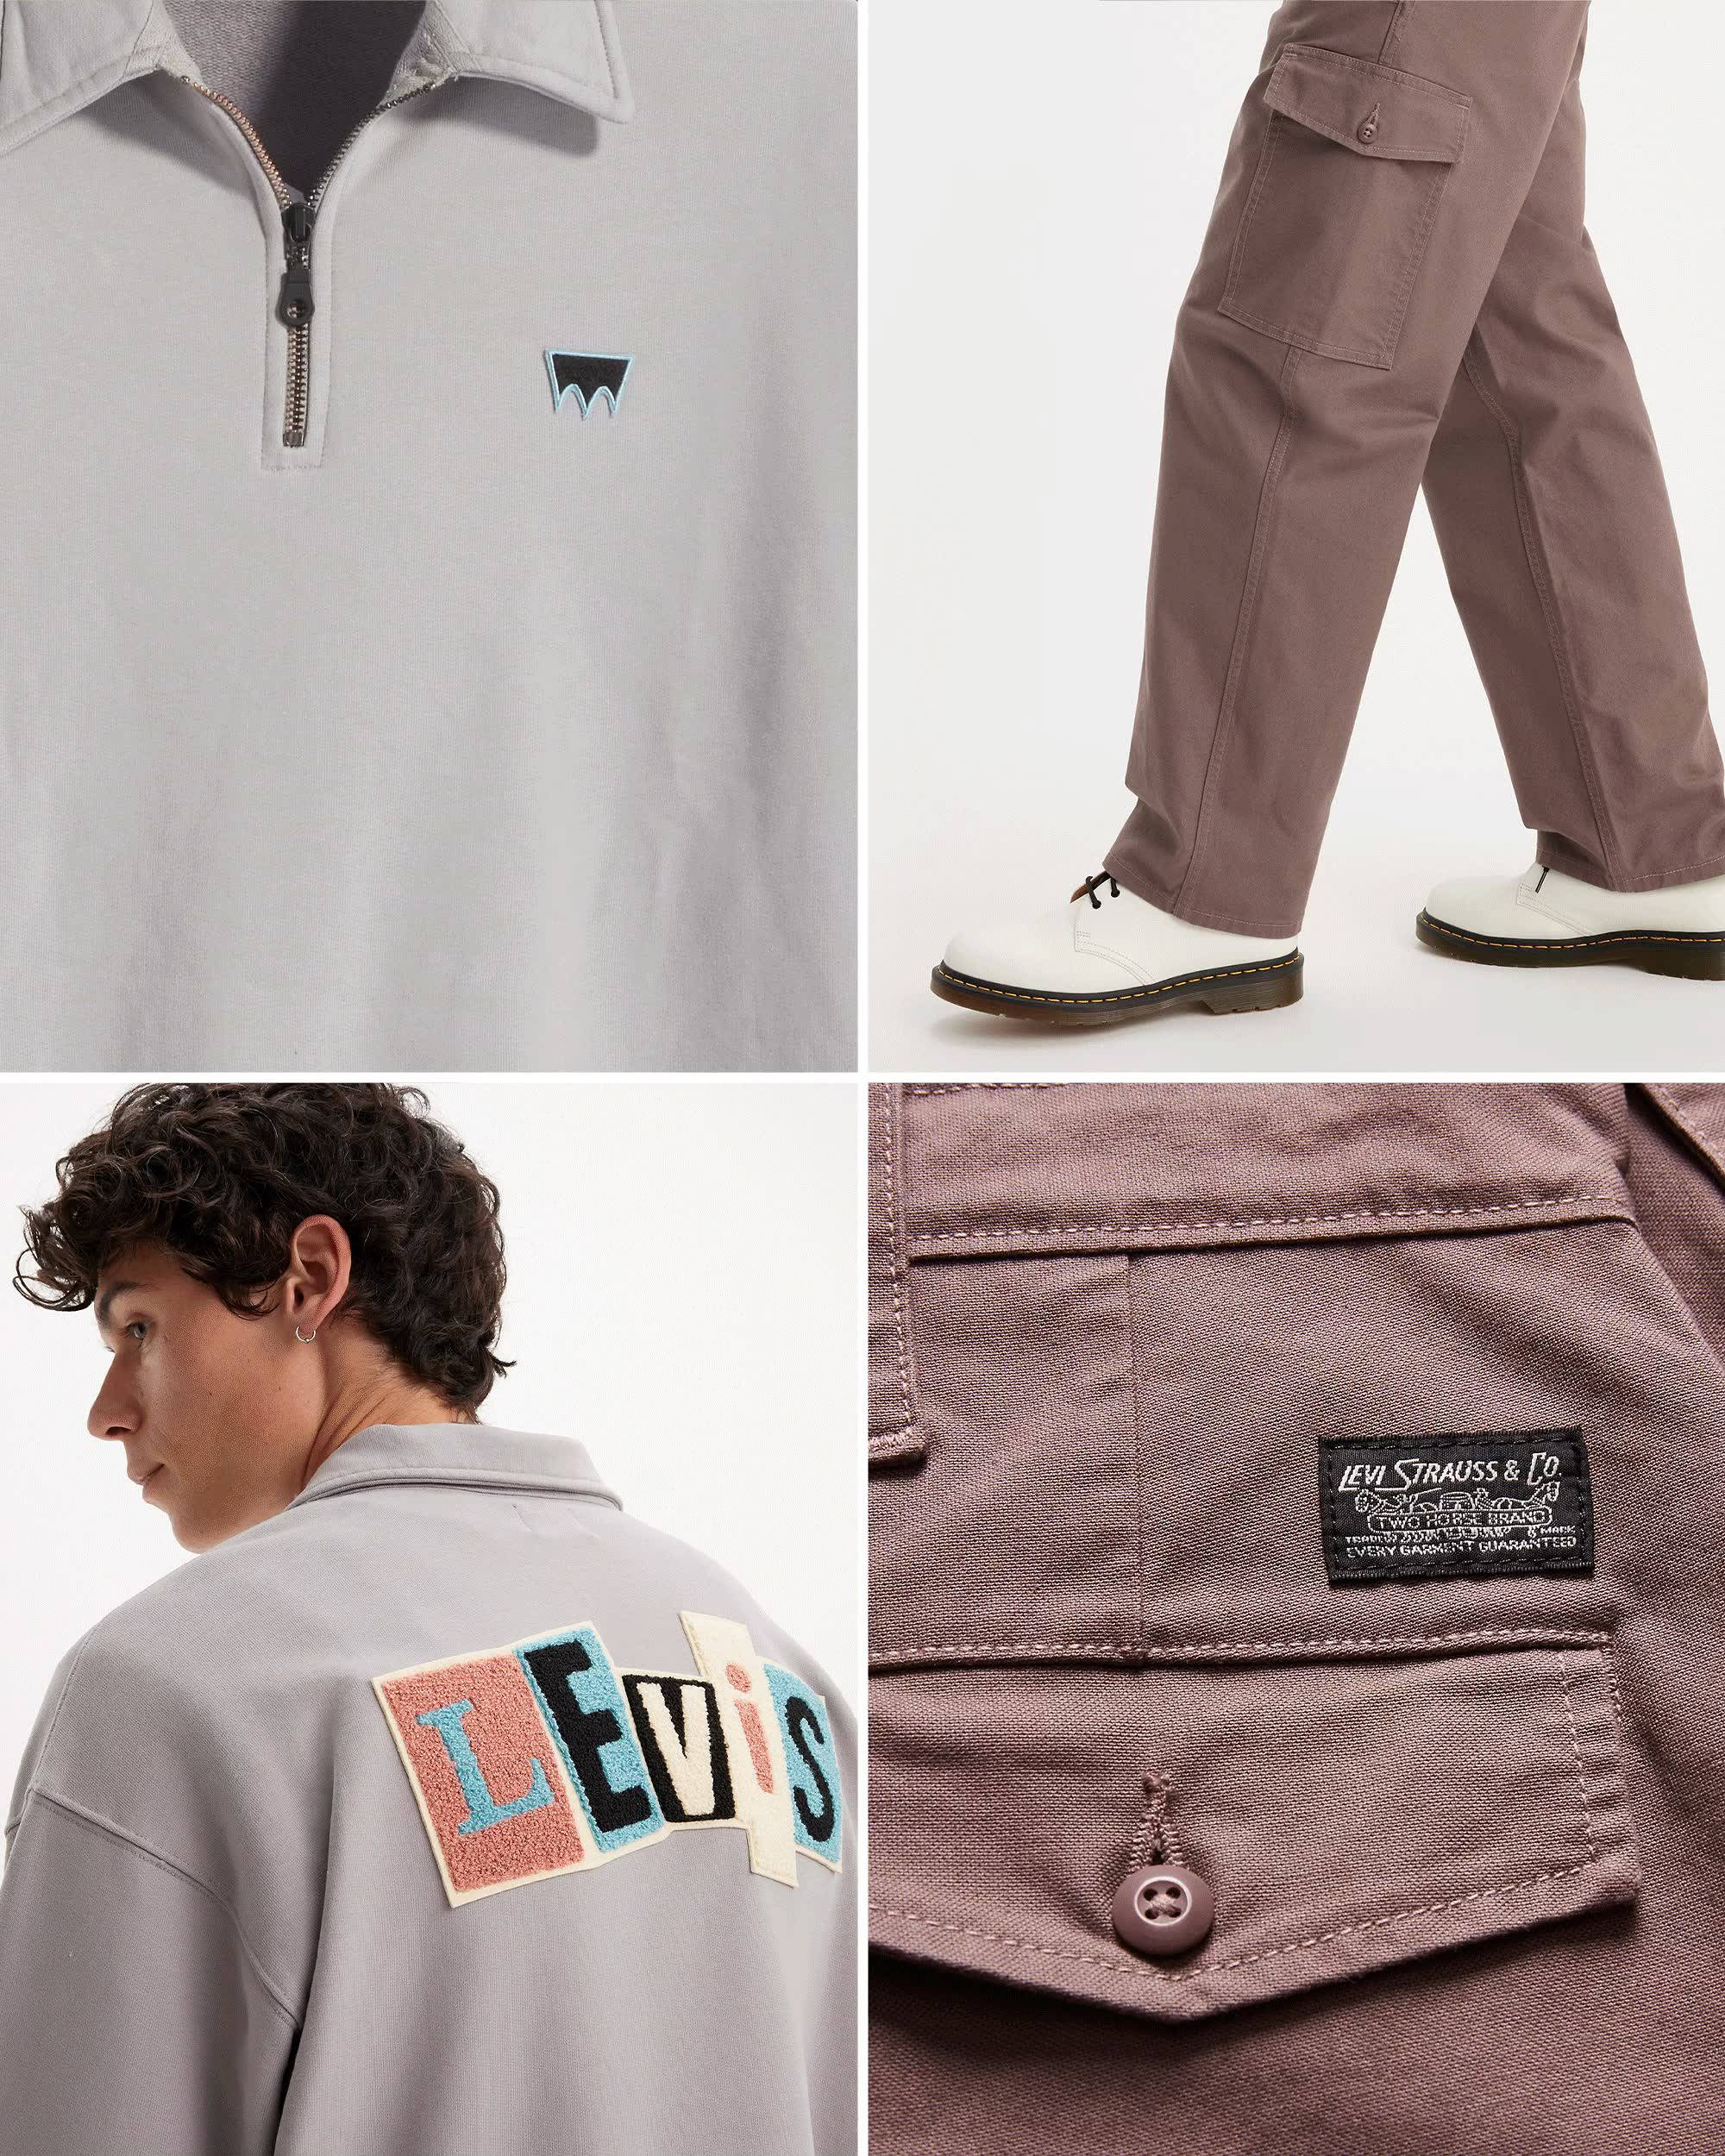 Grid featuring closeup shots contrasted by on model images of new skateboarding collection products